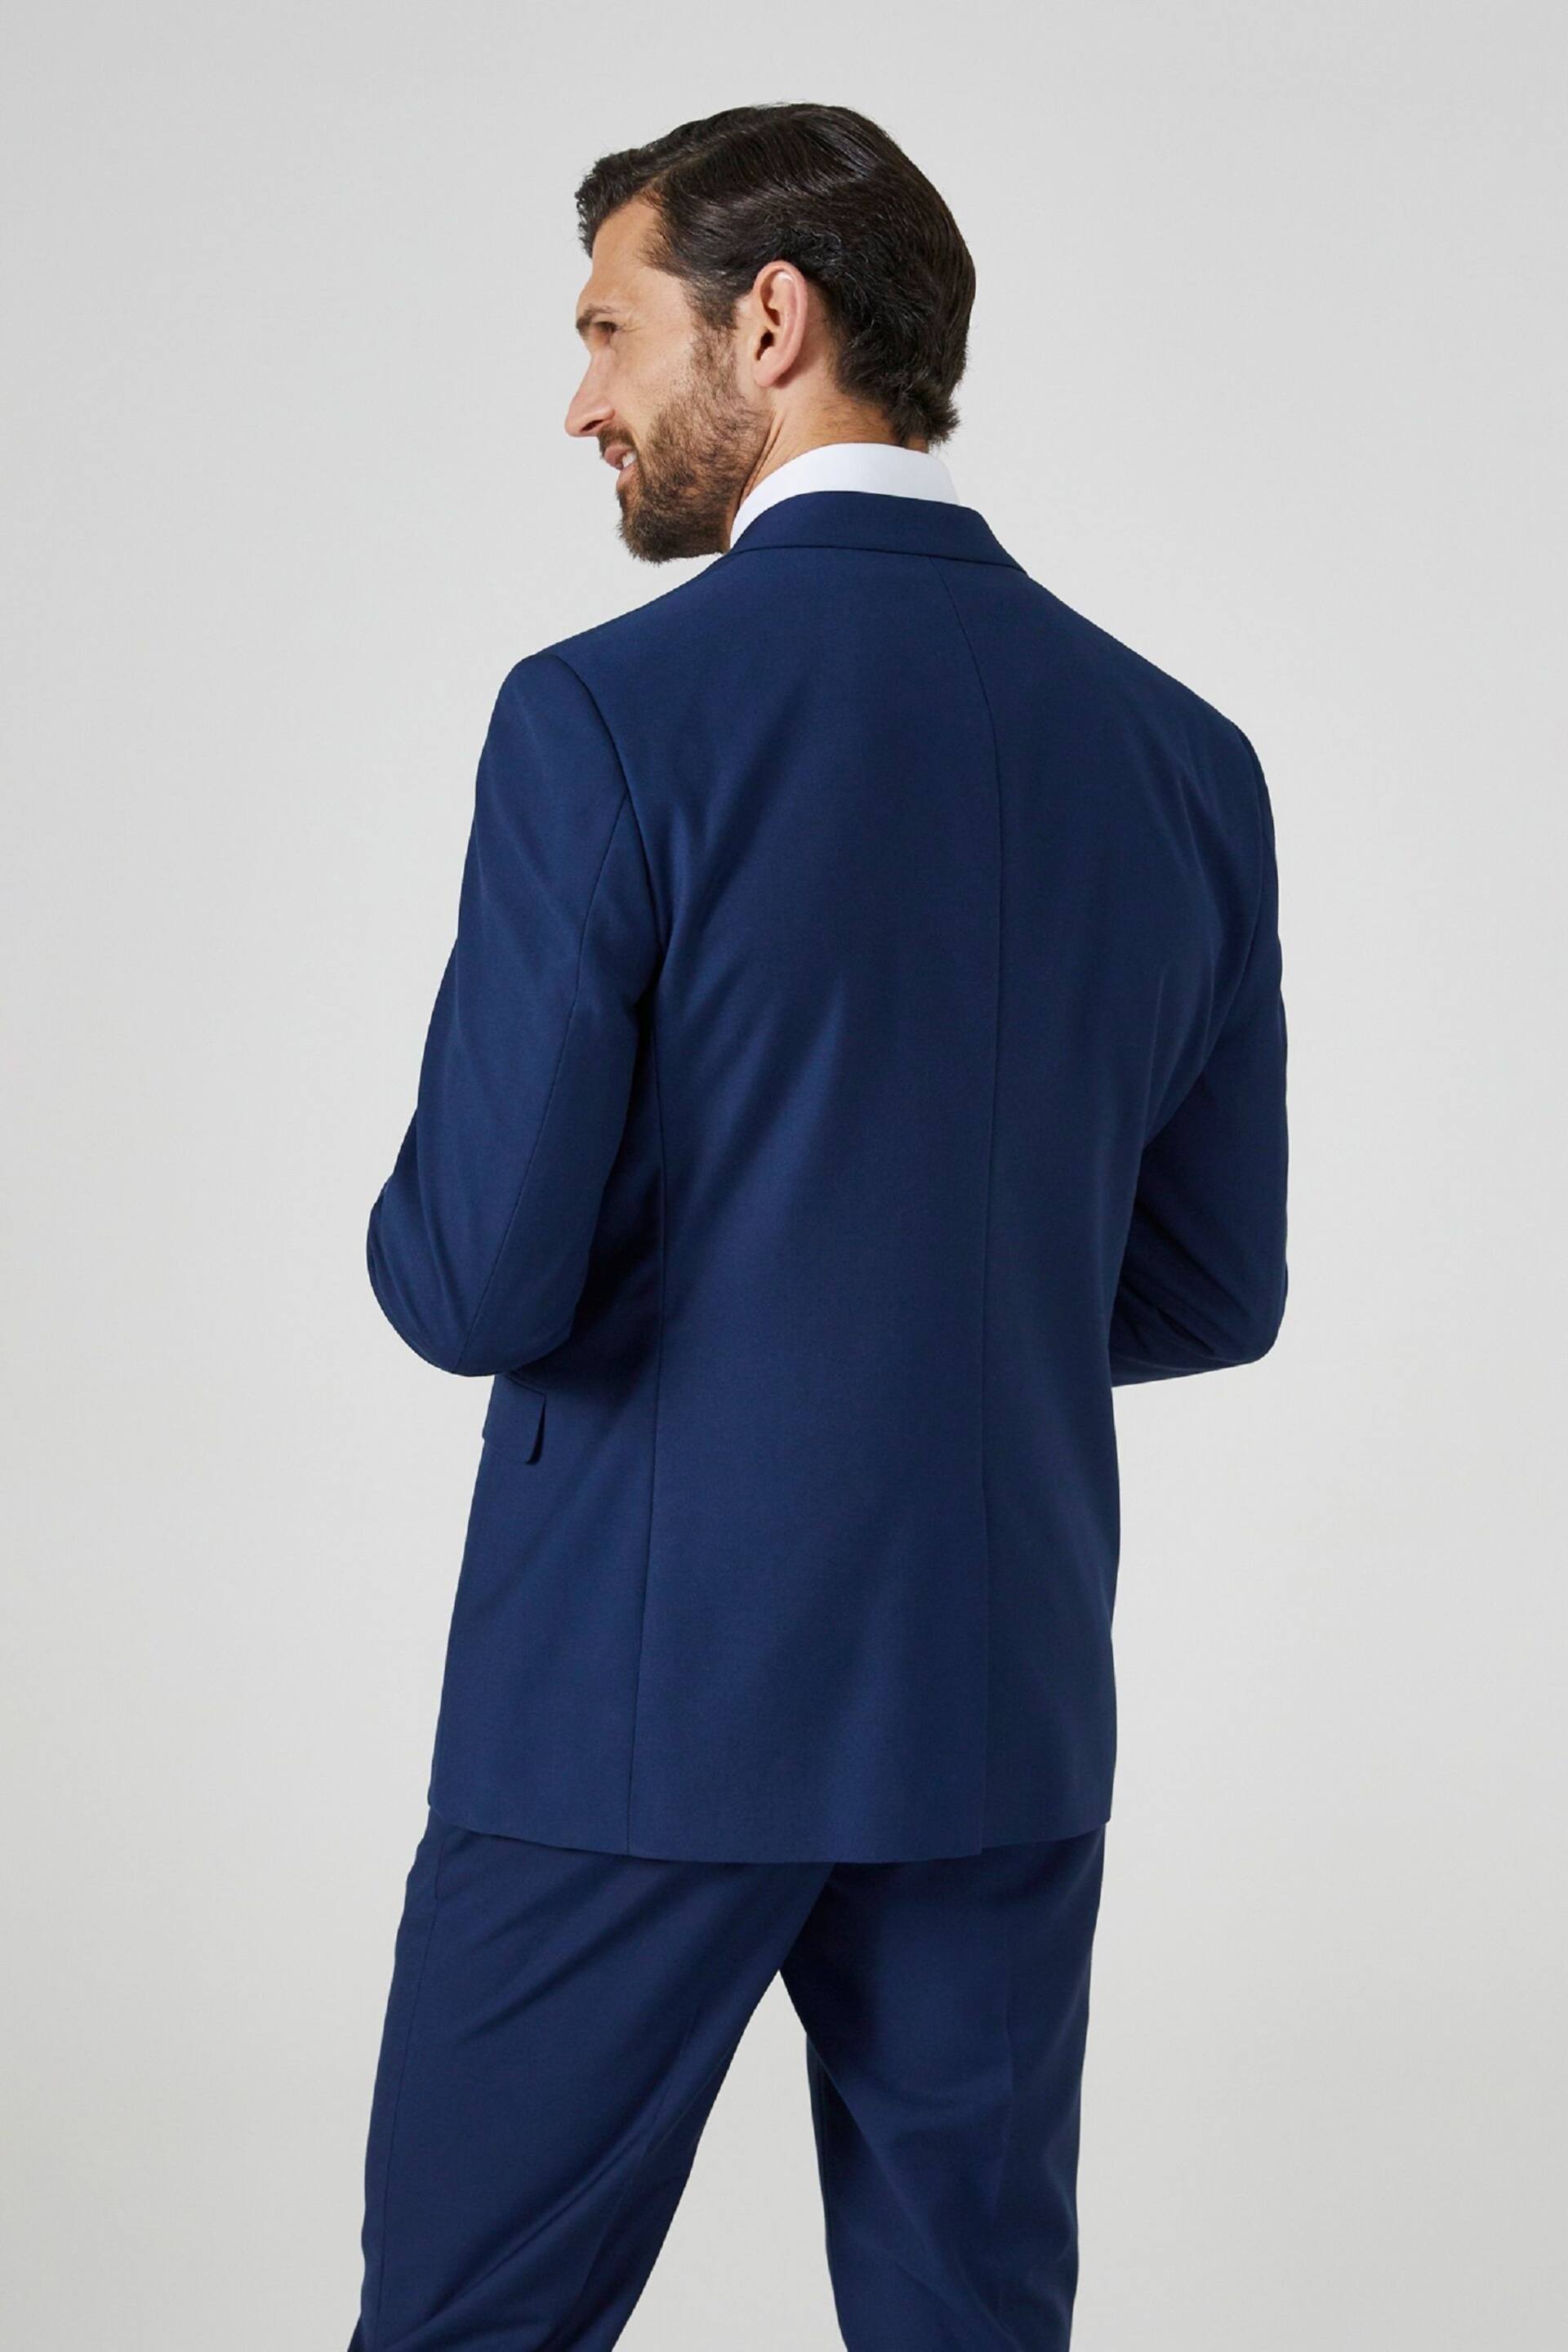 Skopes Kennedy Royal Blue Tailored Fit Suit Jacket - Image 2 of 4